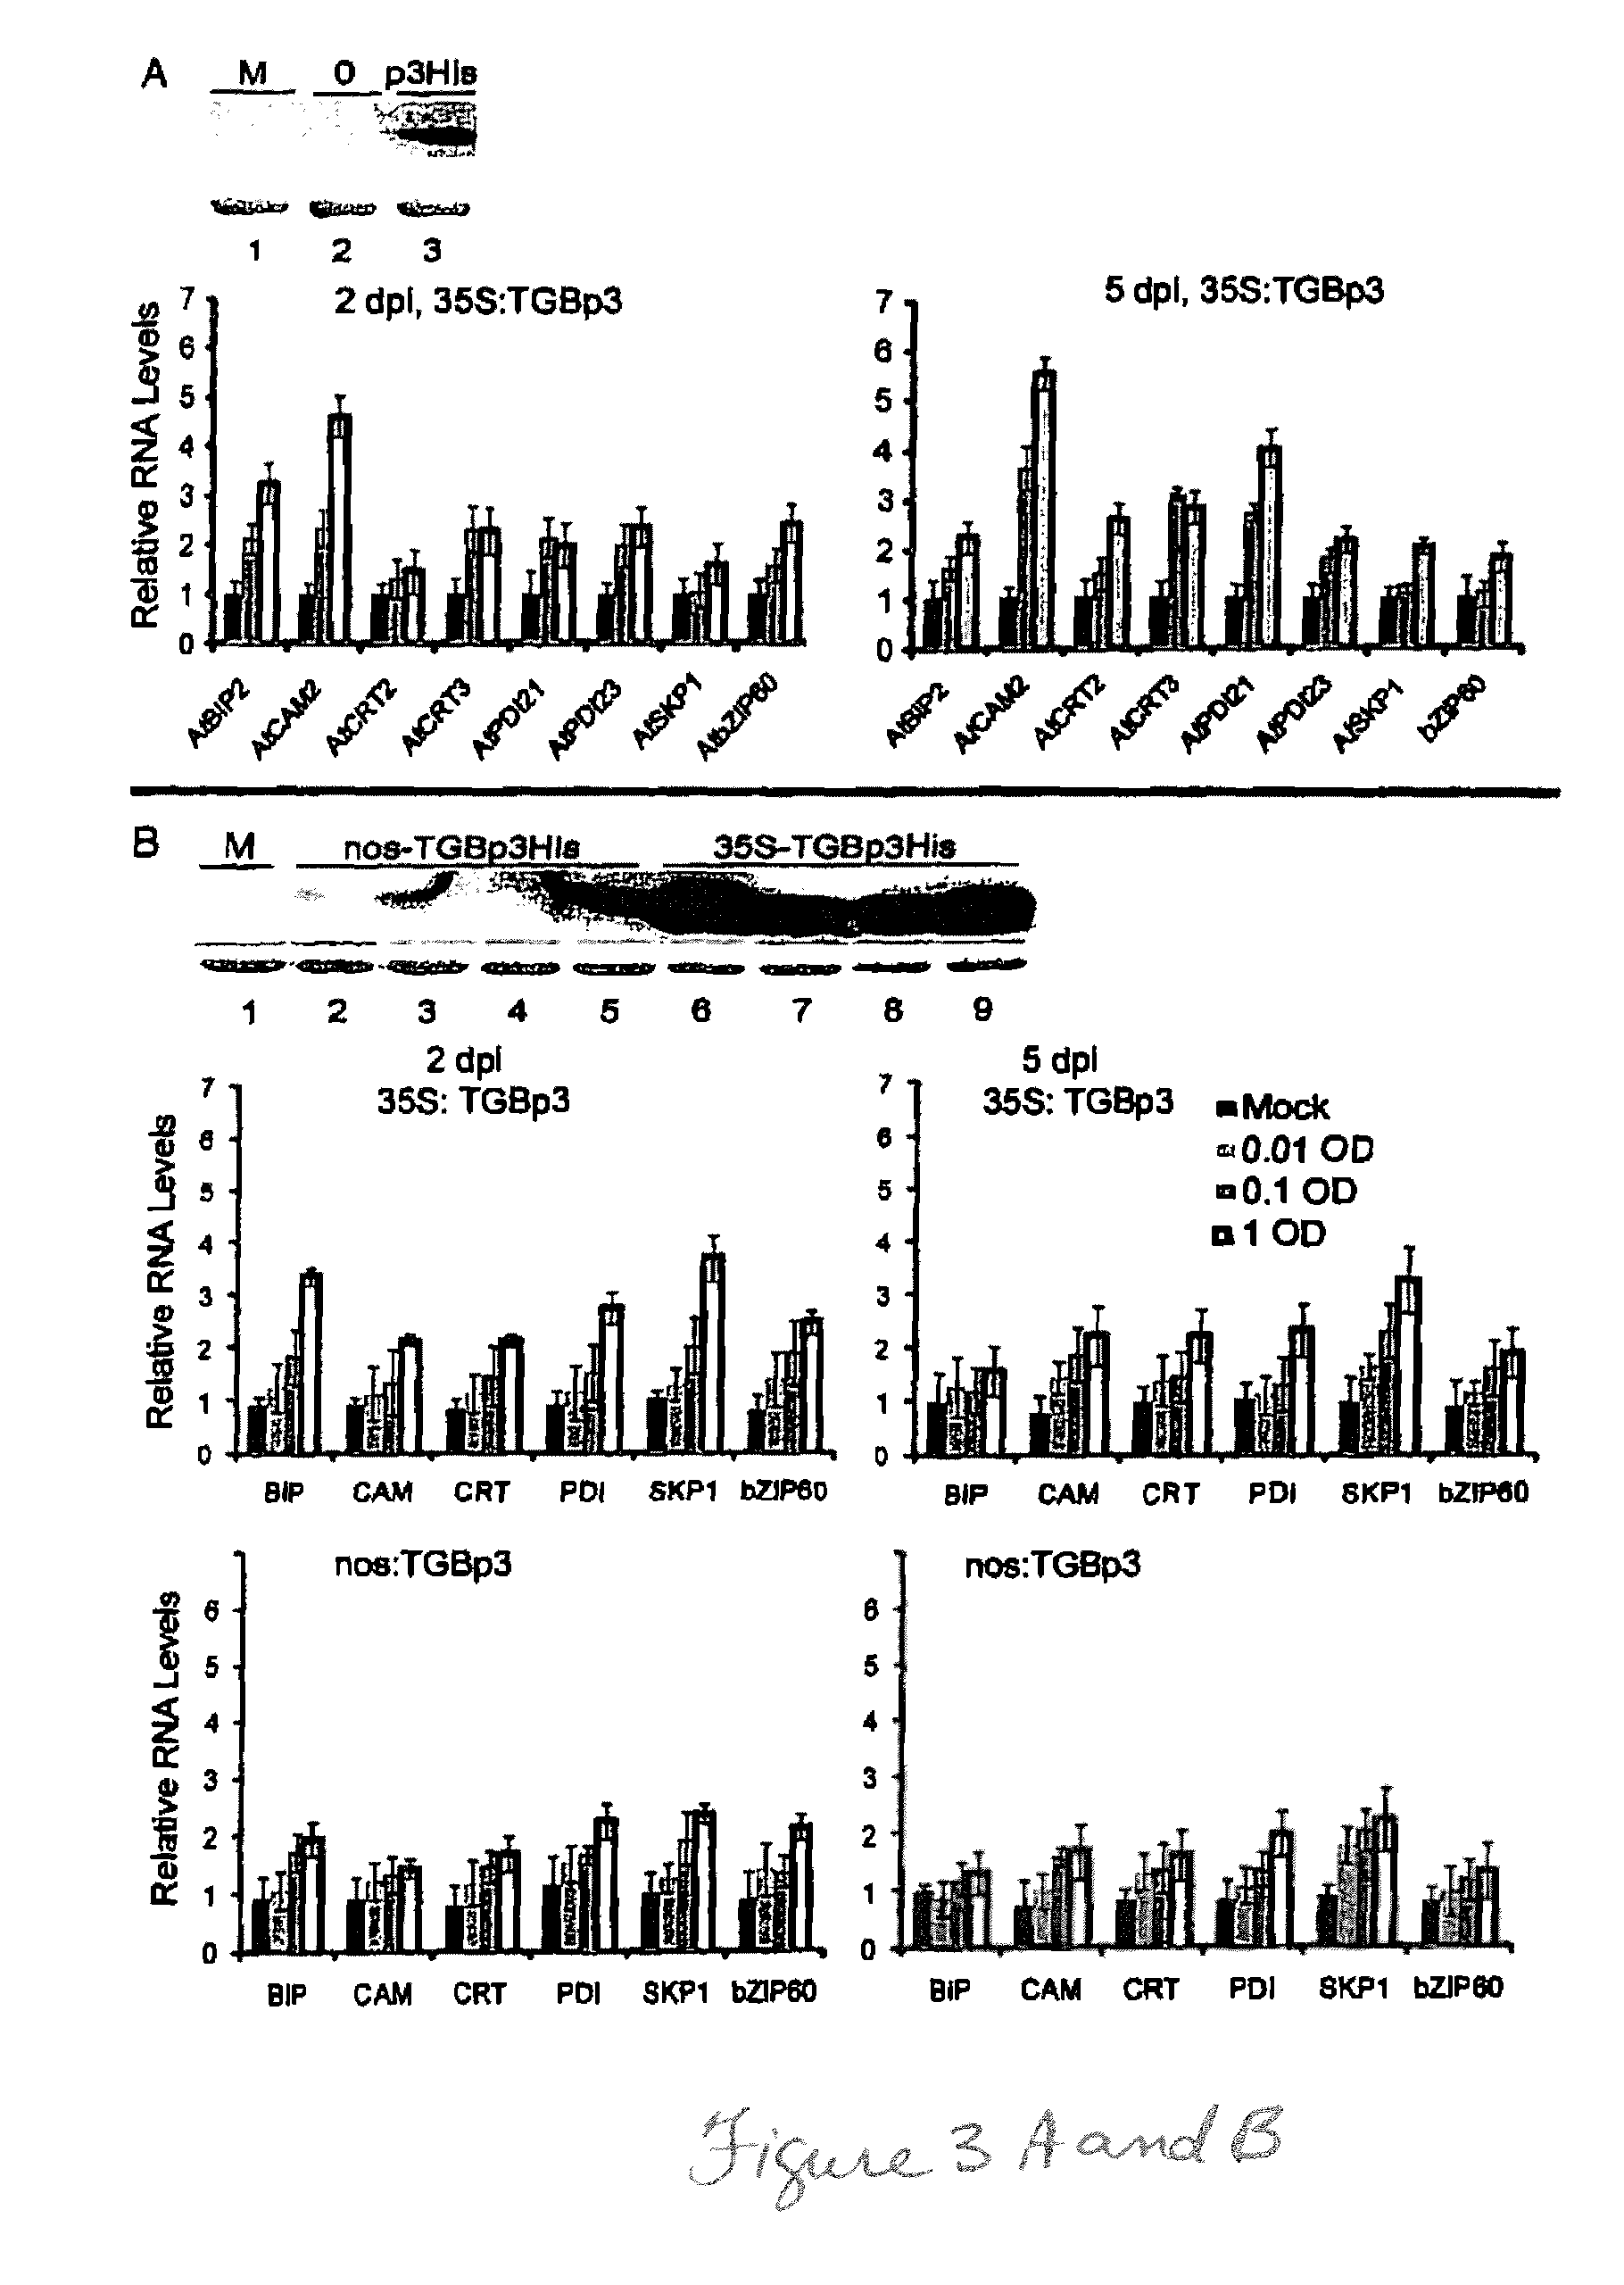 CONTROLLING TGBp3 AND SILENCING bZIP60 TO REGULATE UPR